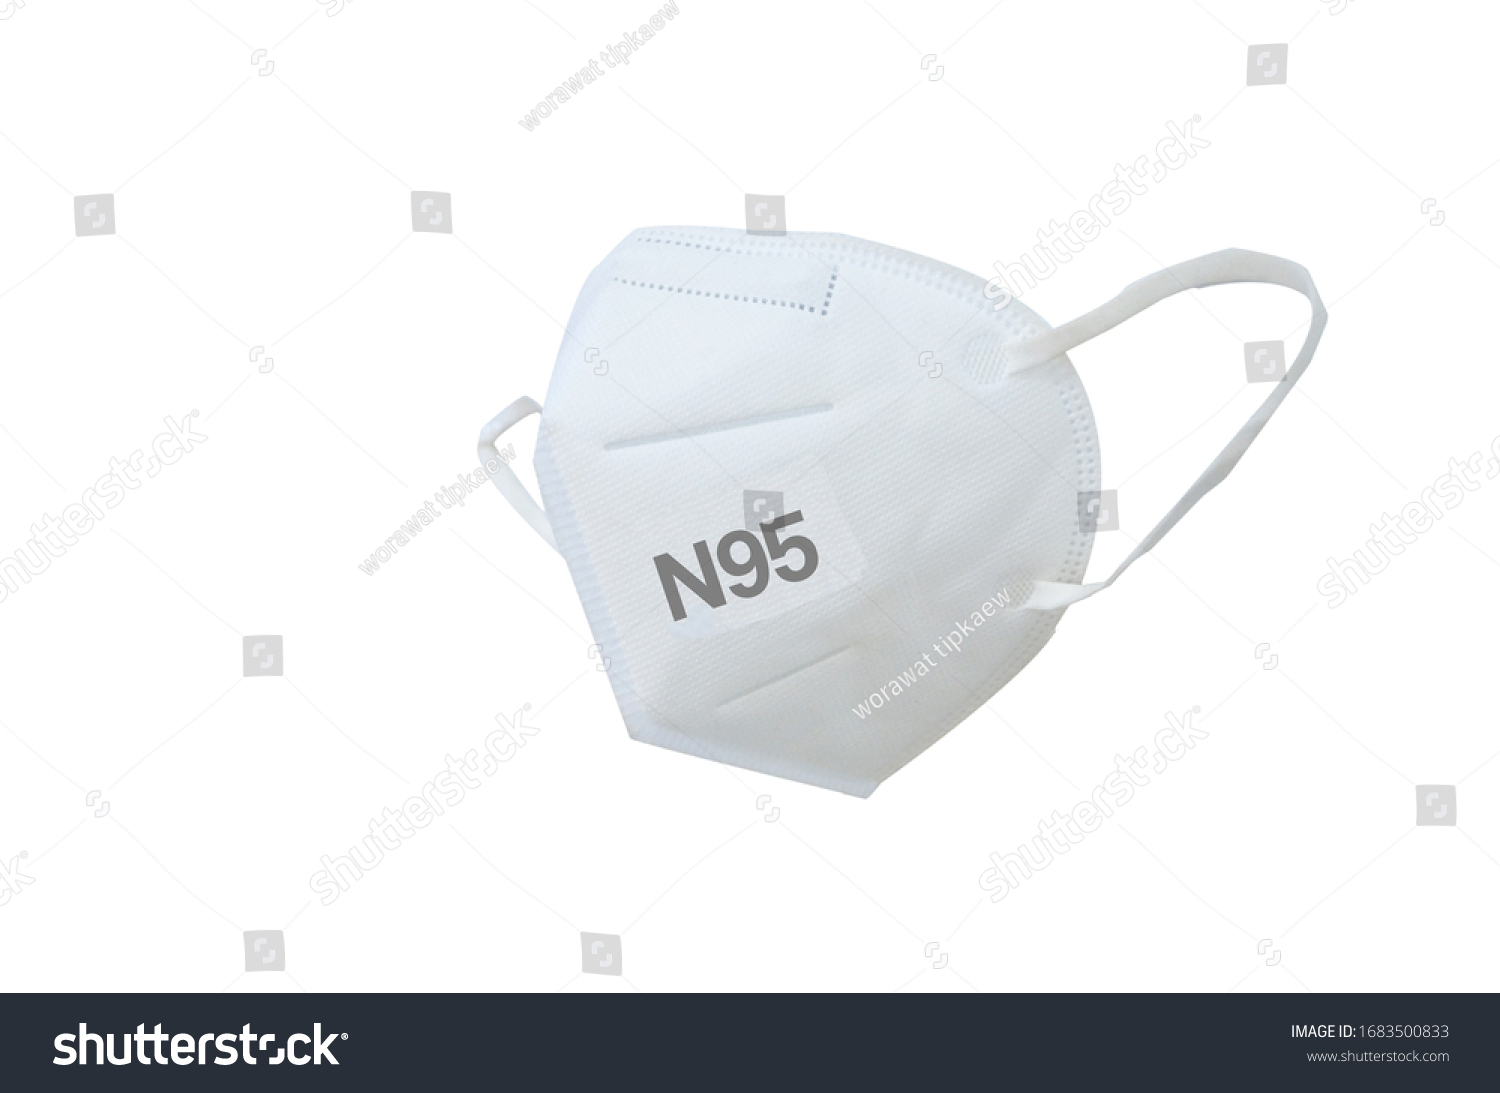 KN95 or N95 mask for protection pm 2.5 and corona virus (COVD-19).Anti pollution mask.air face mask.KN95 or N95 mask with N95 word.n95 on white background . #1683500833